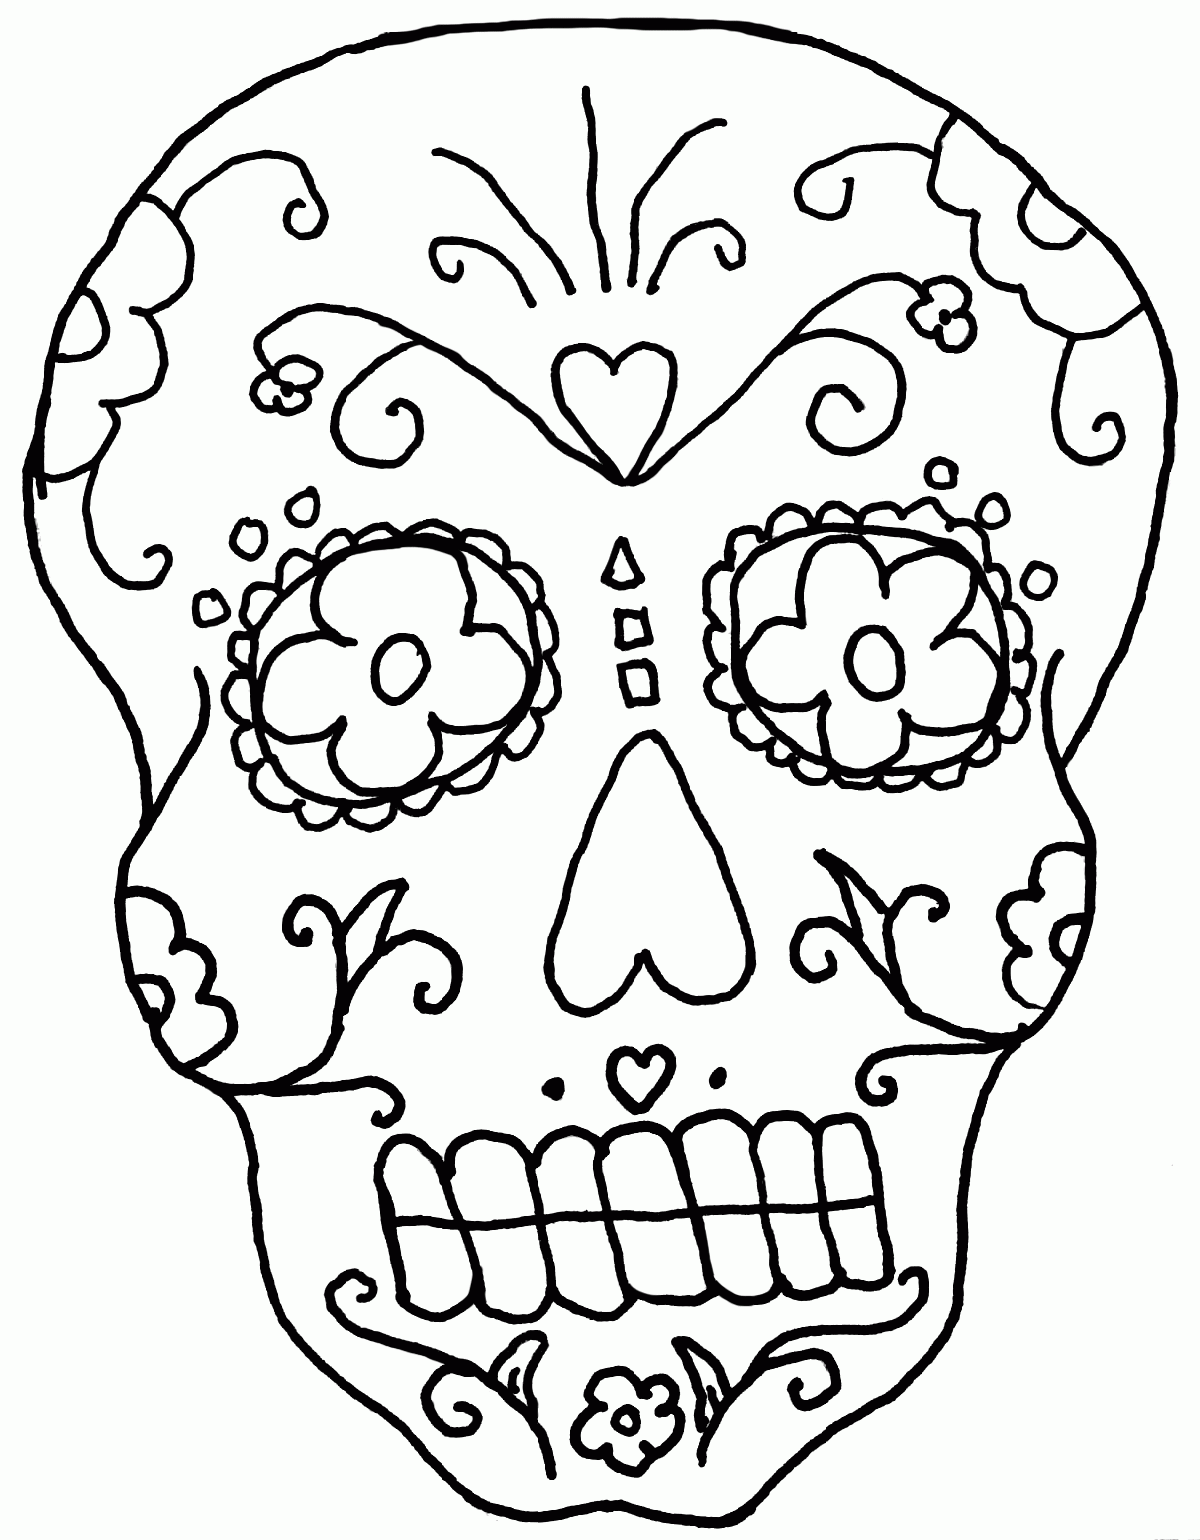 14 Pics of Day Of Dead Skull Girl Face Coloring Pages - Day of the ...